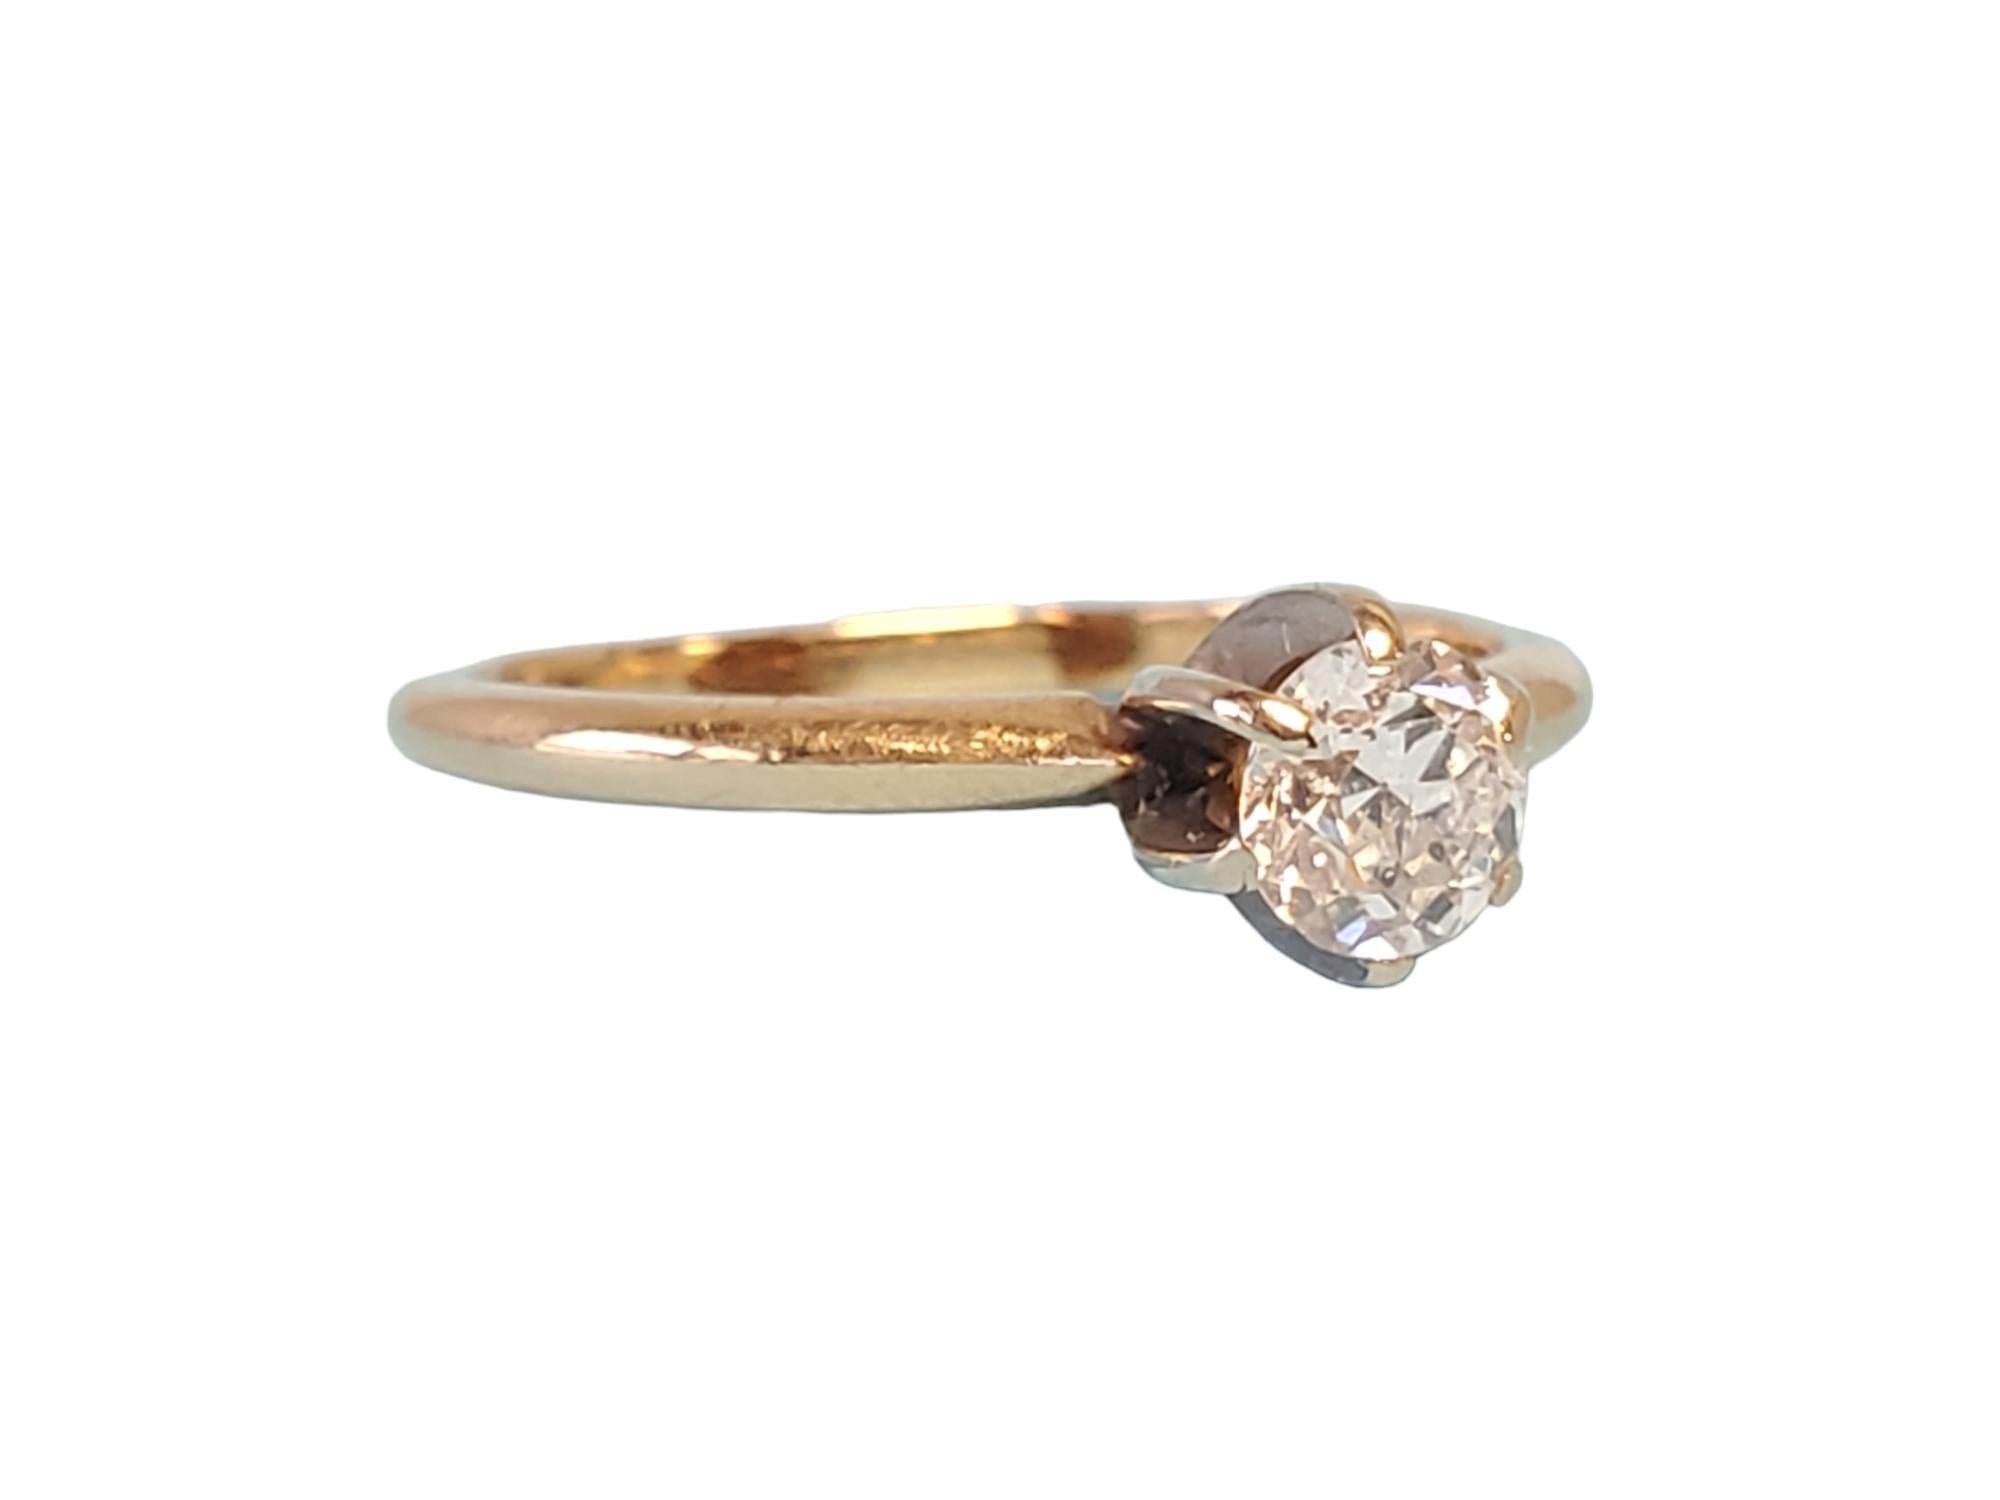 Vintage Diamond Solitaire 

Listed is a newly acquired vintage solitaire with a .40-.50ct old euro diamond that is extremely white approximately G color SI2-I1. Most old cut diamonds have faint yellow in them but this one is exceedingly white and